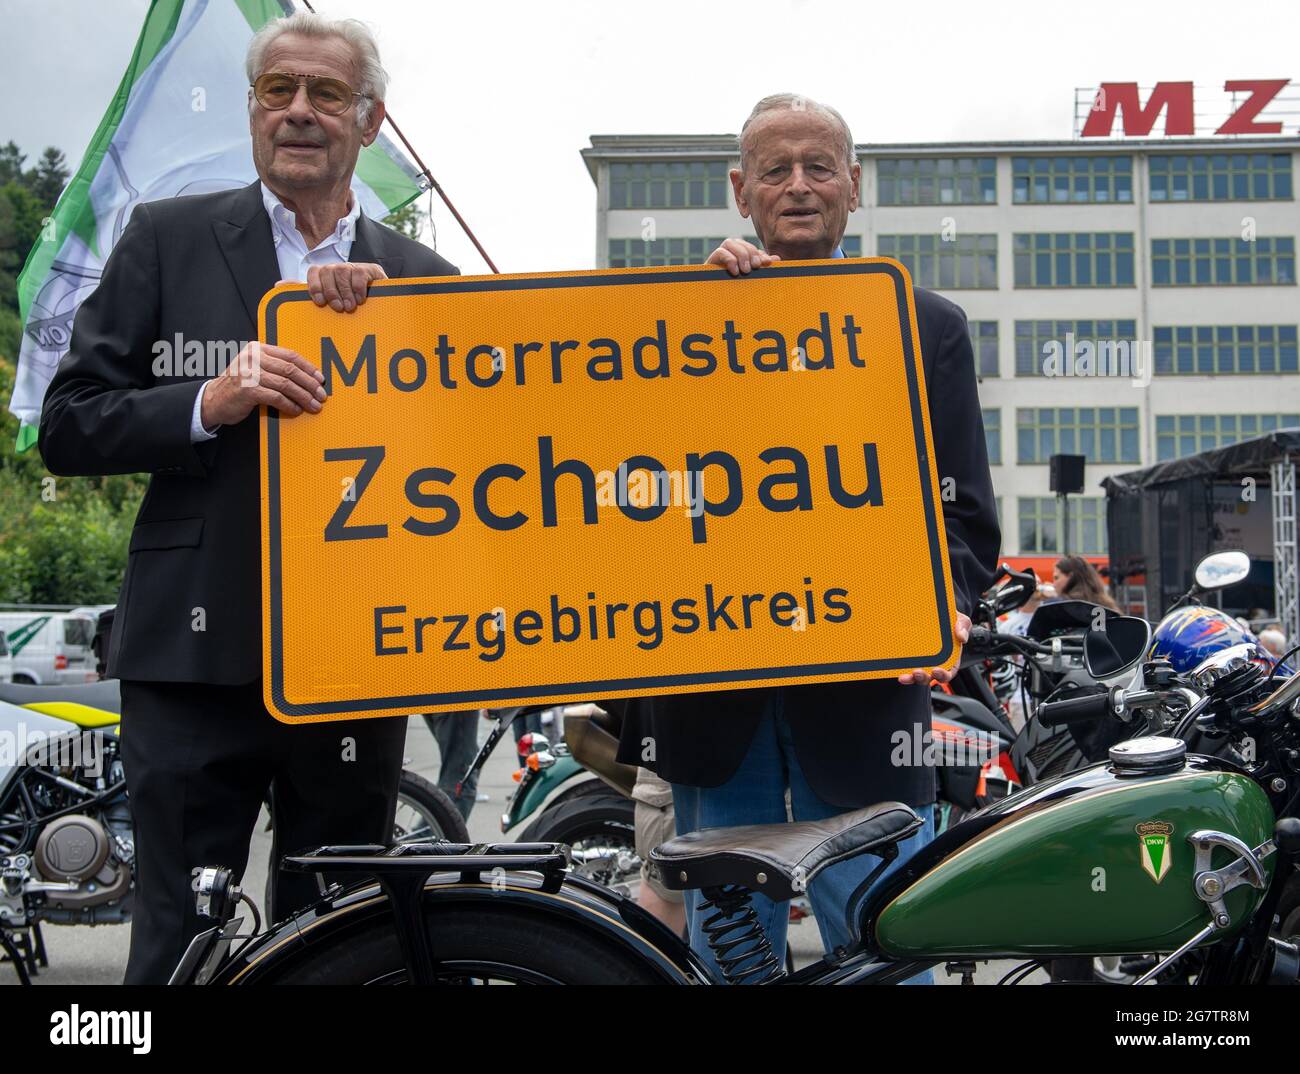 Zschopau, Germany. July 16 2021: Jörgen S. Rasmussen (l), grandson of the eponymous founder of the Zschopau engine works, and Carl Hahn, former Chairman of the Board of Management of Volkswagen, stand by a DKW SB 200 from 1936 in front of the former DKW and MZ motorcycle factory in Zschopau with the new entrance sign to the motorcycle town. Flanked in style by hundreds of two-wheelers, mainly from DKW and MZ production, the town has now been awarded the title of Motorcycle Town. Motorcycles were built in the Saxon city between 1922 and 2016. Credit: dpa picture alliance/Alamy Live News Stock Photo